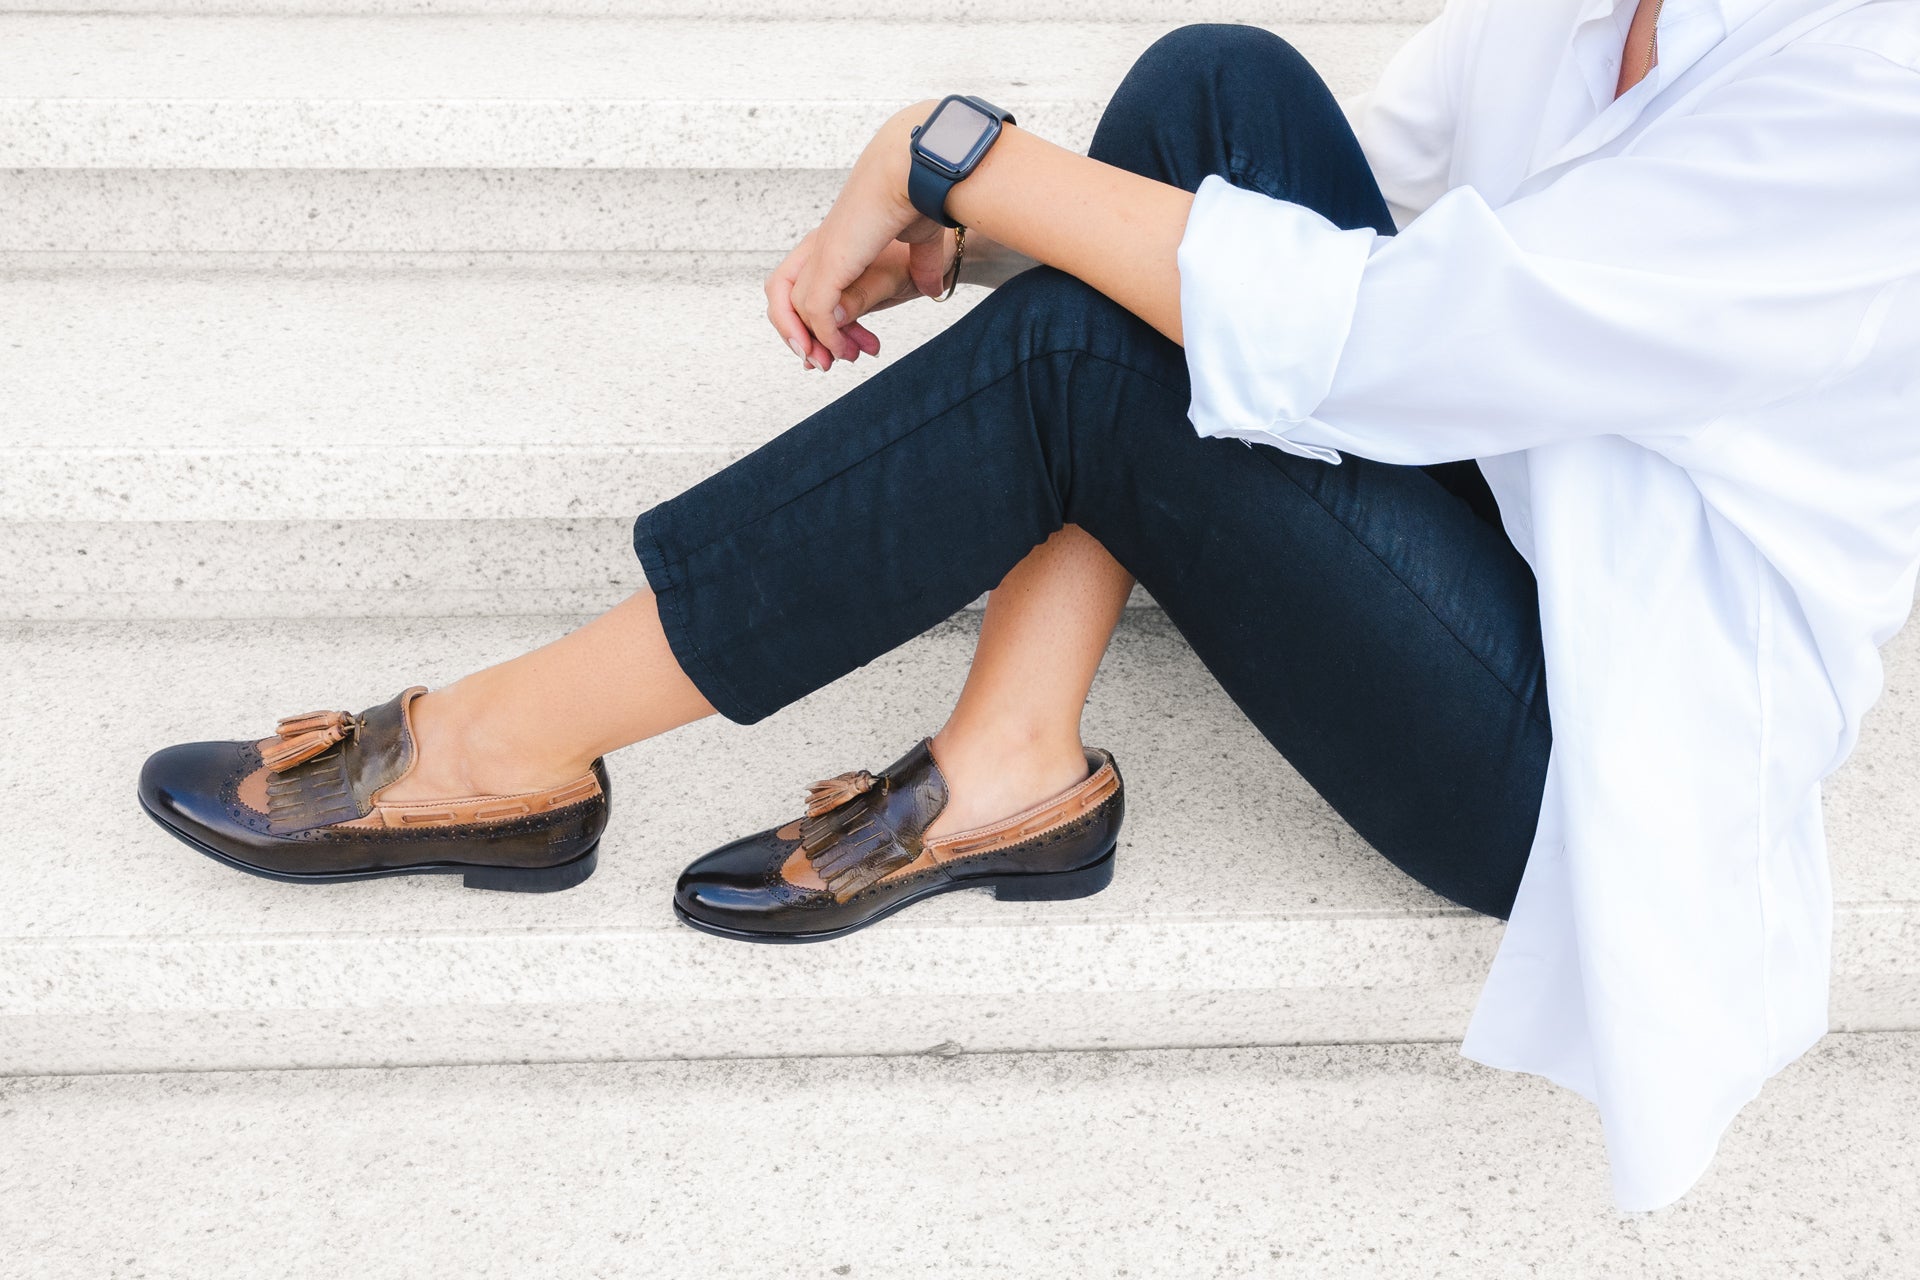 How to Wear Sneakers to Work: The Complete Guide - Wisestep